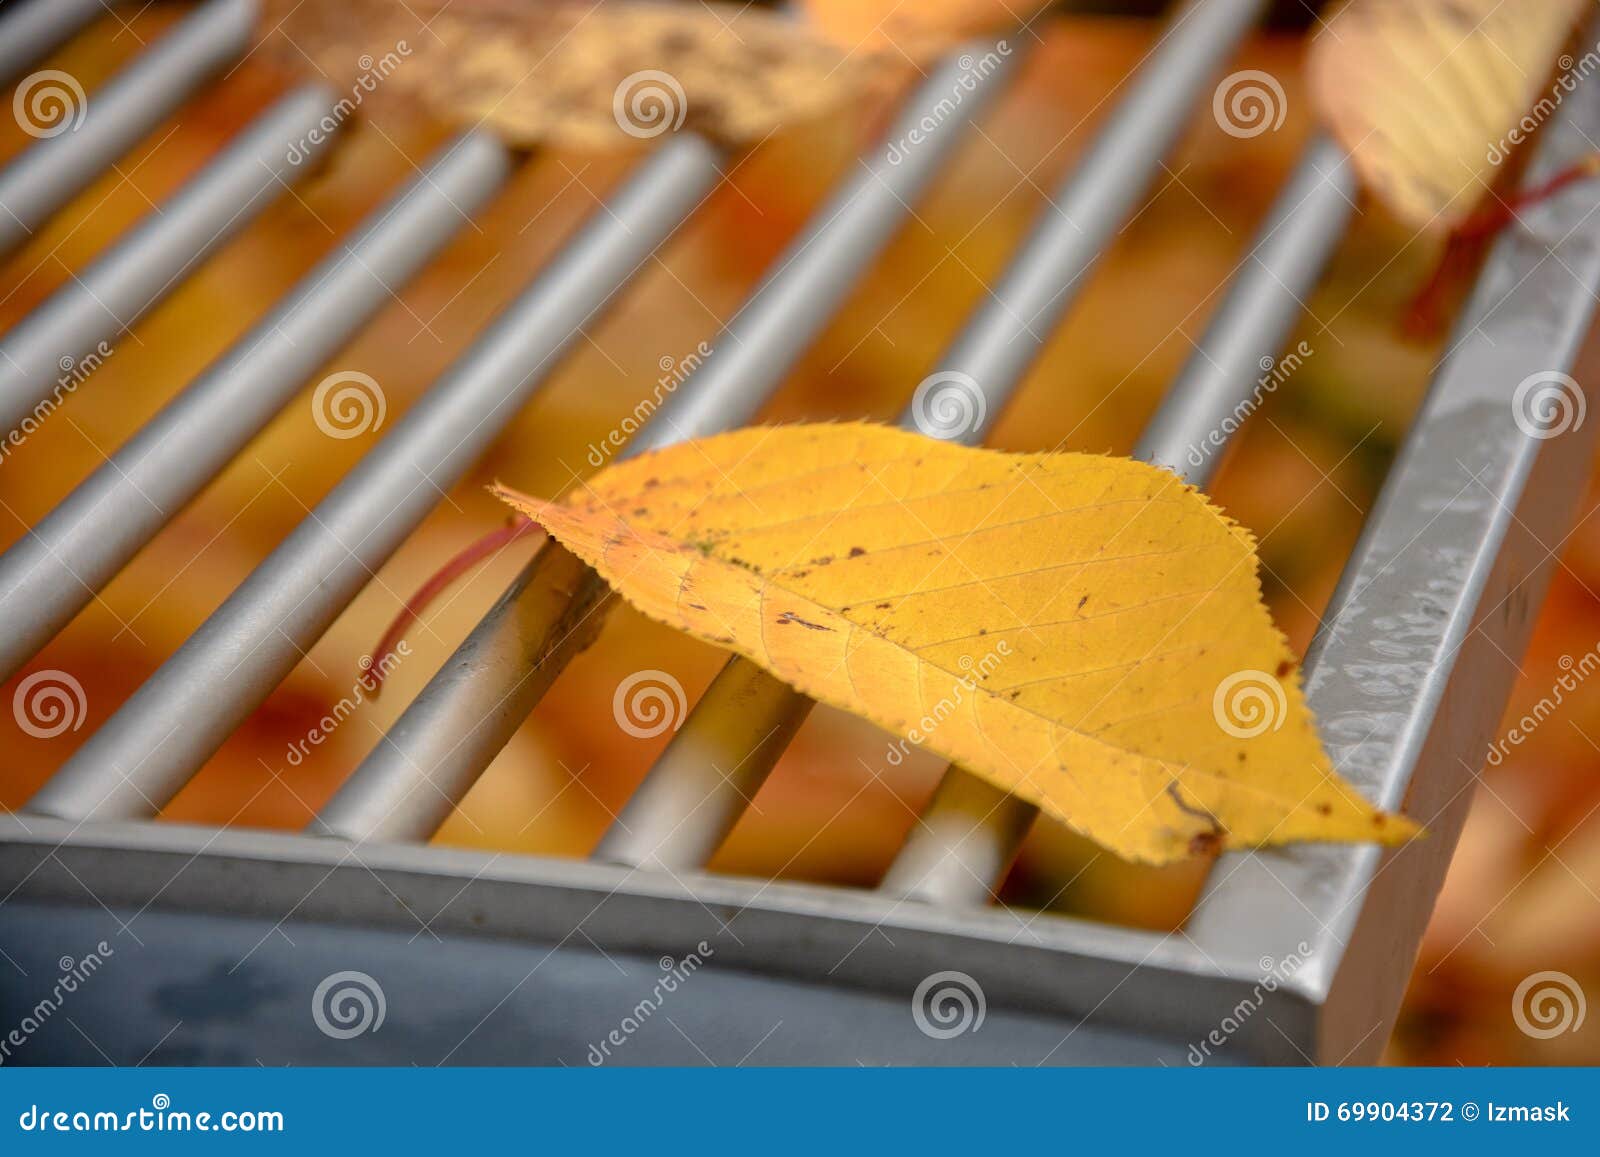 detail of bench with leaves